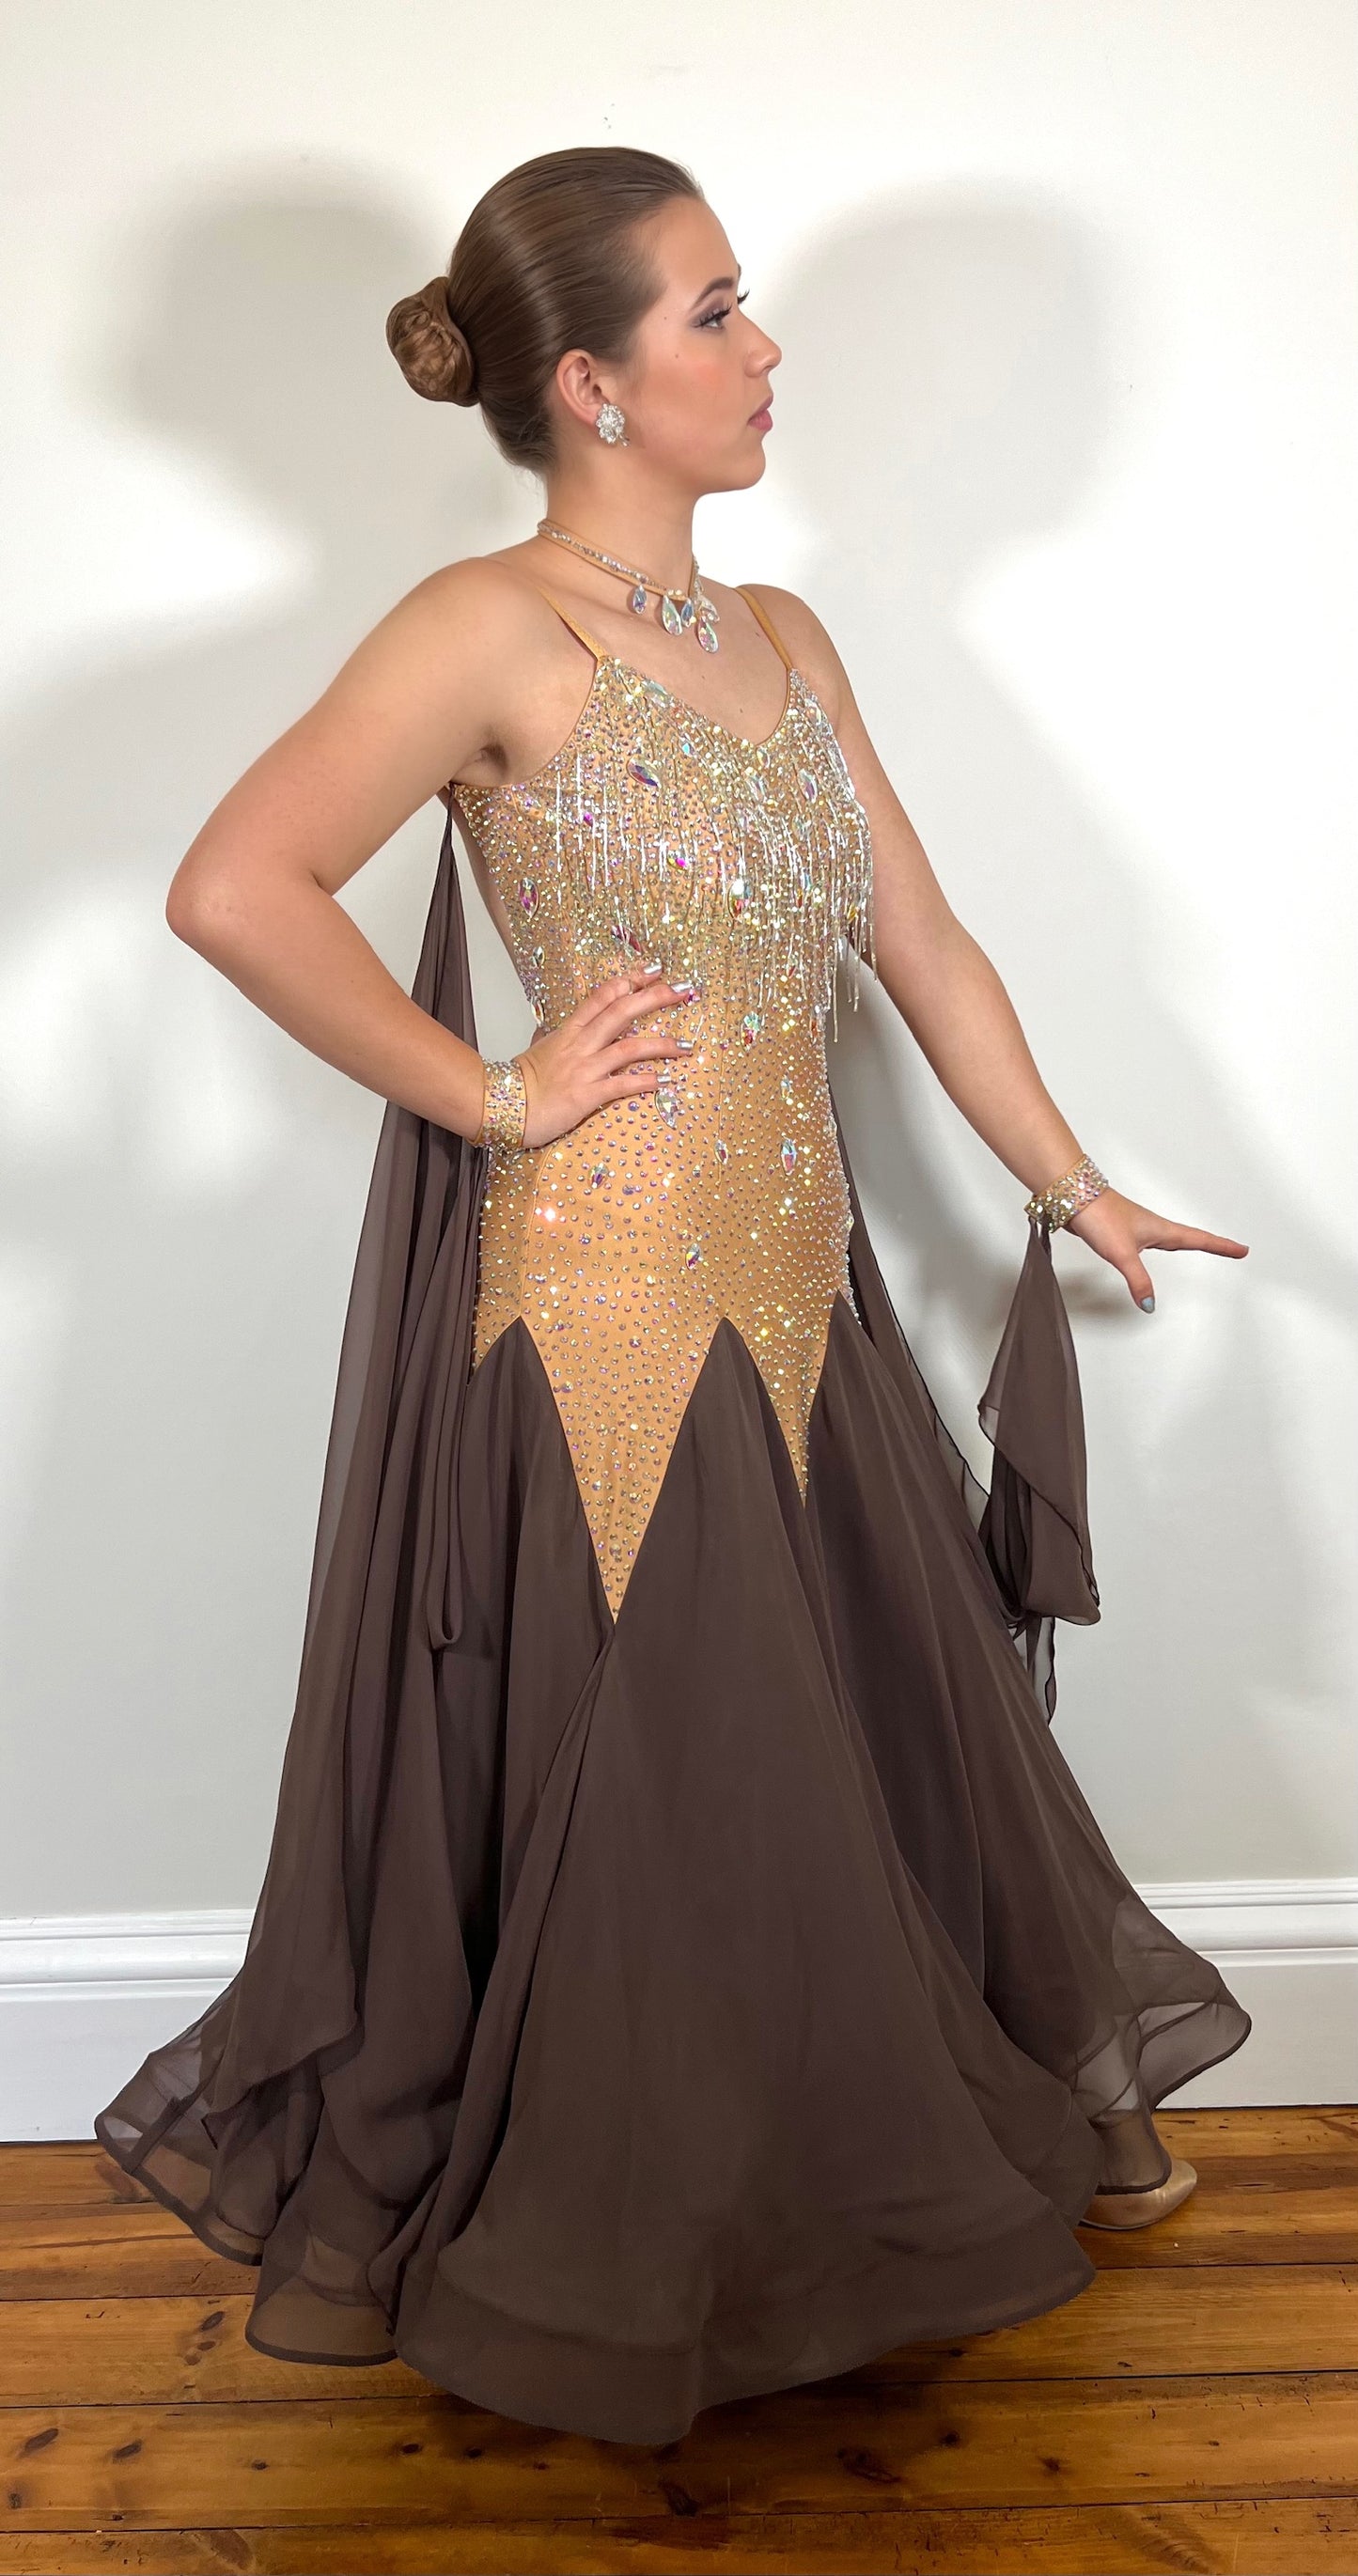 0001 Light Gold & Chocolate Sleeveless Ballroom Dress. Chocolate detachable floats to stoned cuffs. Decorated with bead droppers & AB stones.